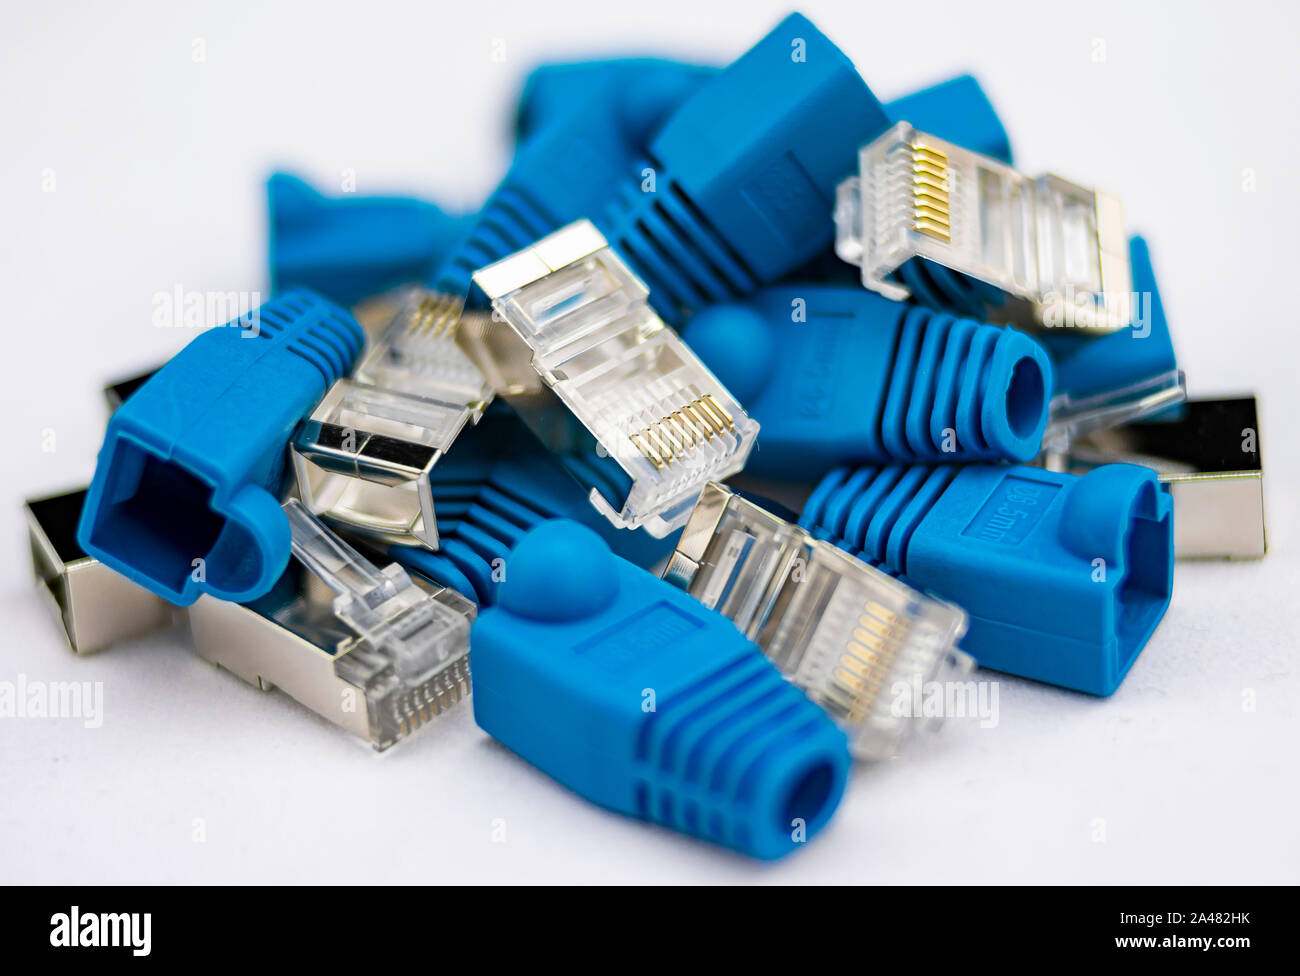 Parts of an RJ45 connector or network cable with gold pins and blue shield with metal insulator Stock Photo